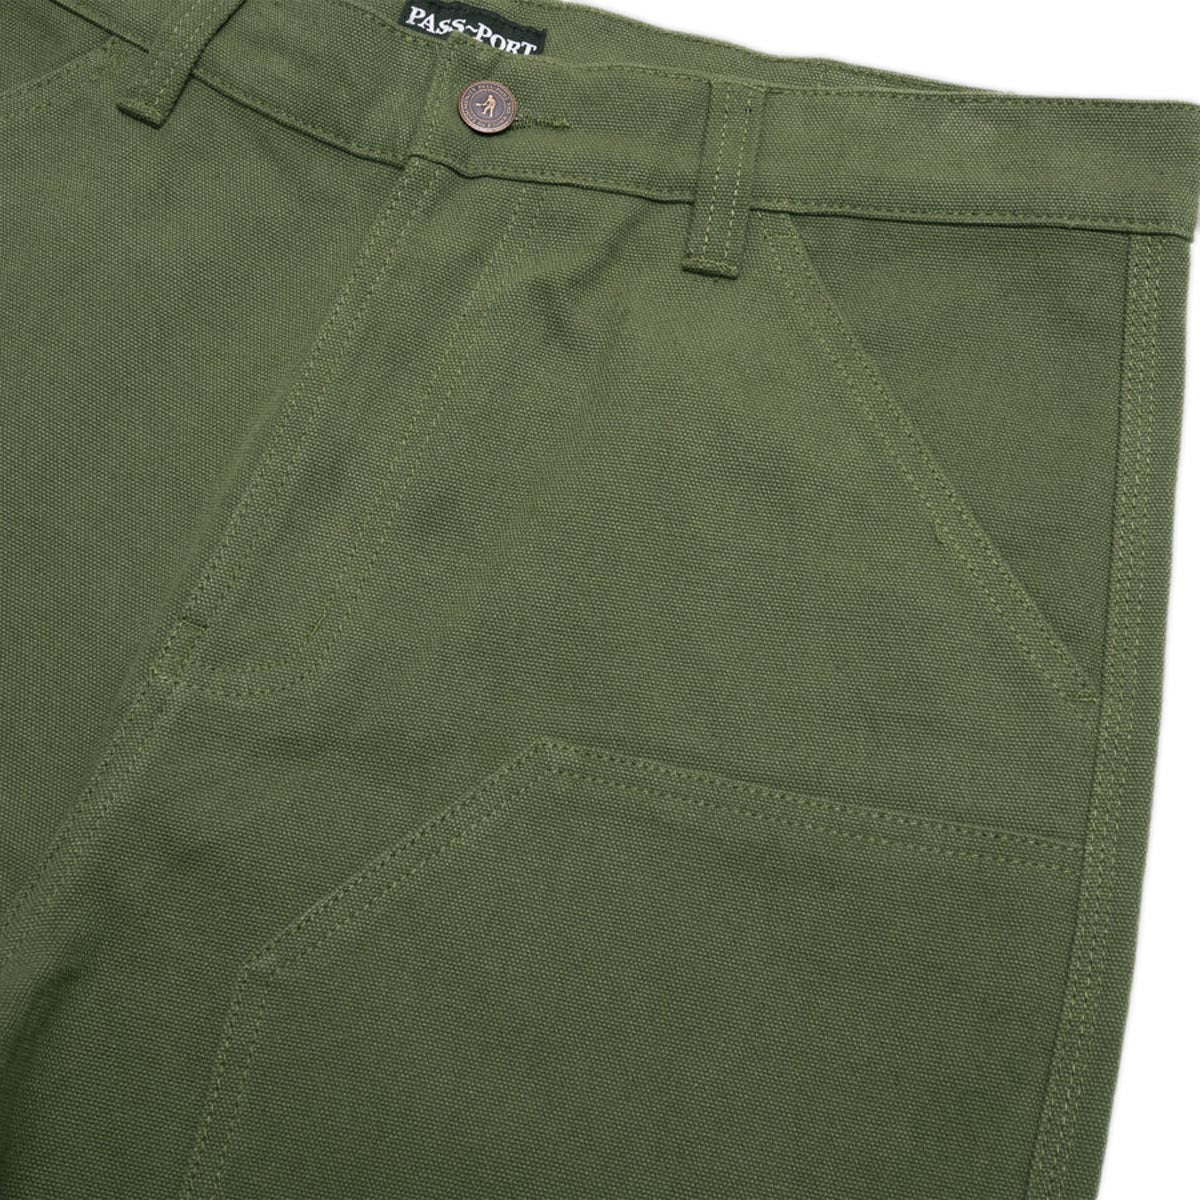 Passport Double Knee Diggers Club Pants - Olive image 4